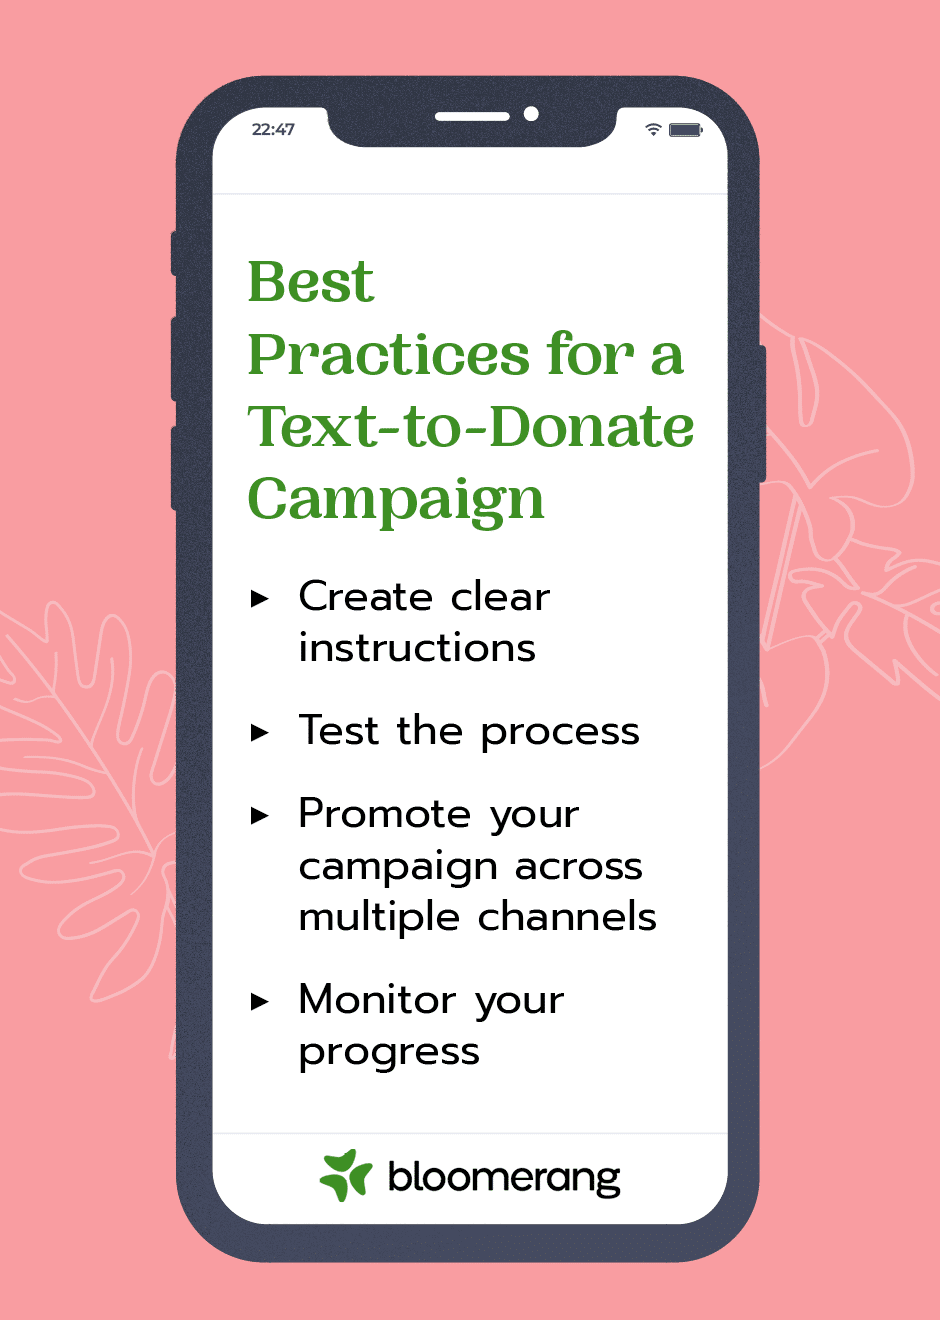 Best practices for a text-to-donate campaign (explained in the text below) 